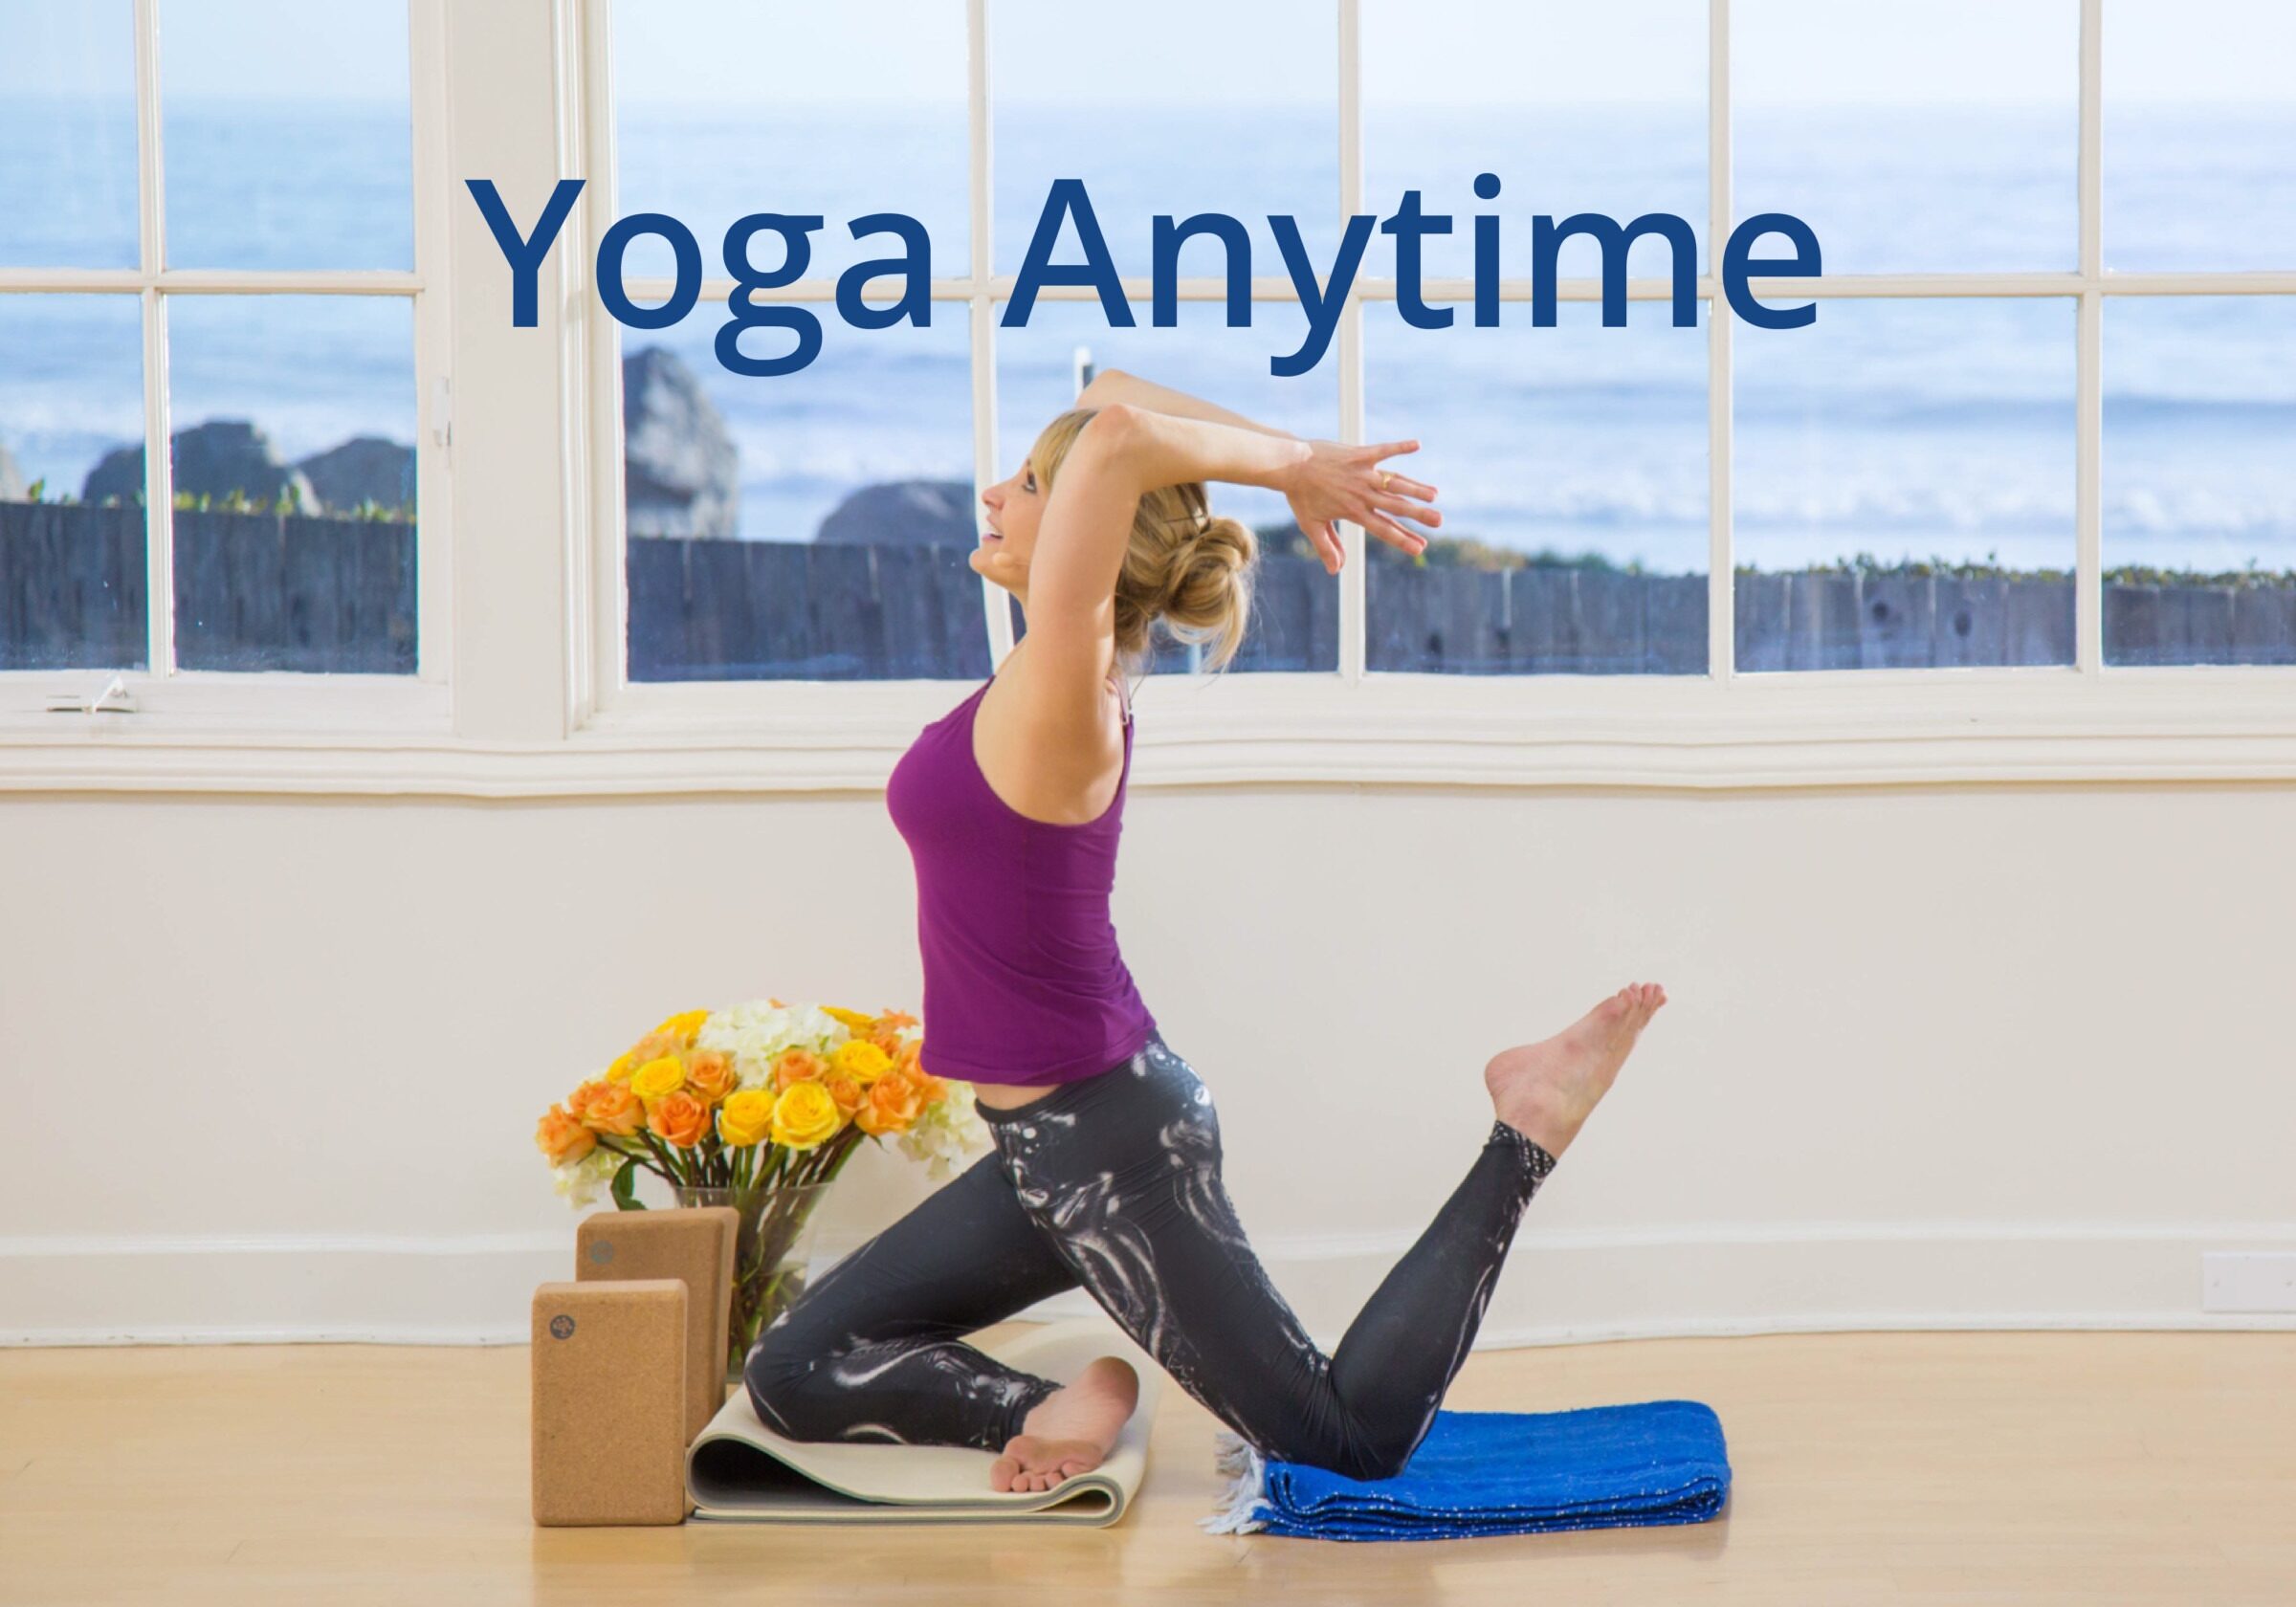 These online classes will allow you to experience how I would teach a live class to my students. You can also use them to explore your personal movement practice or get new ideas for teaching your own classes and workshops. 
<a class="button" href="https://trinaaltman.com/yoga-anytime/">LEARN MORE</a>